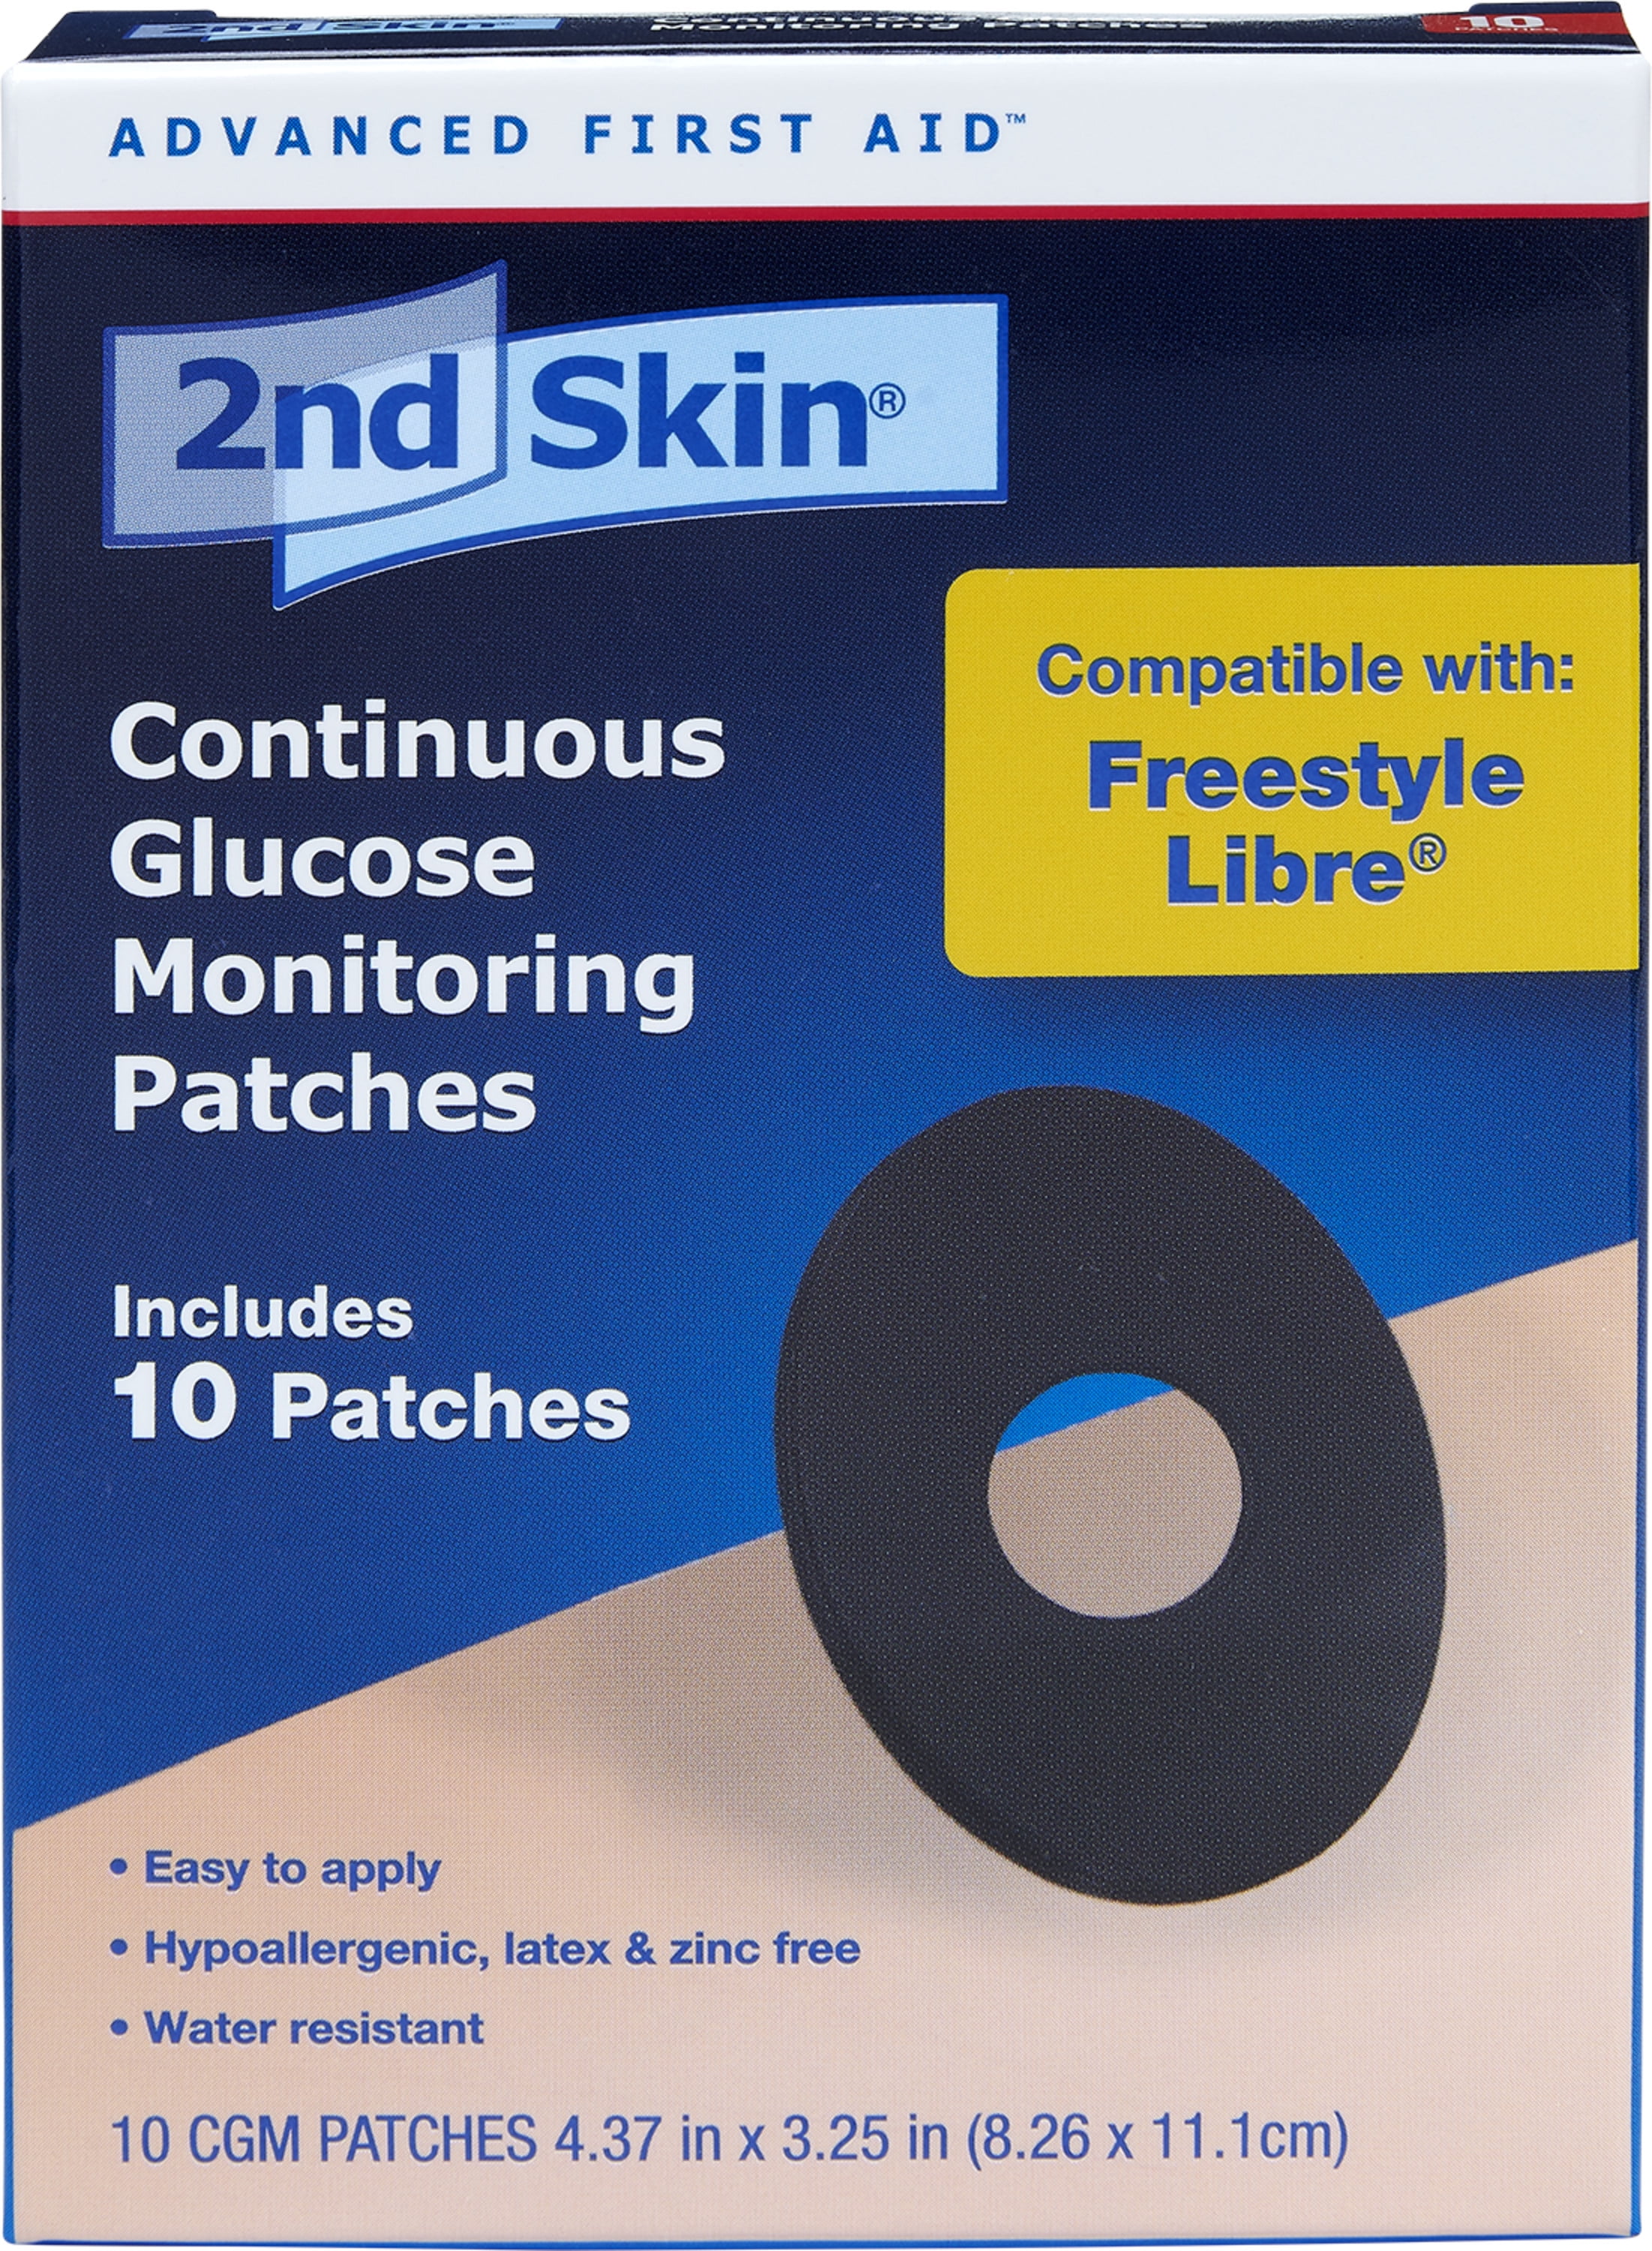 Curad Continuous Glucose Monitor Patches, Tan, 25 Ct